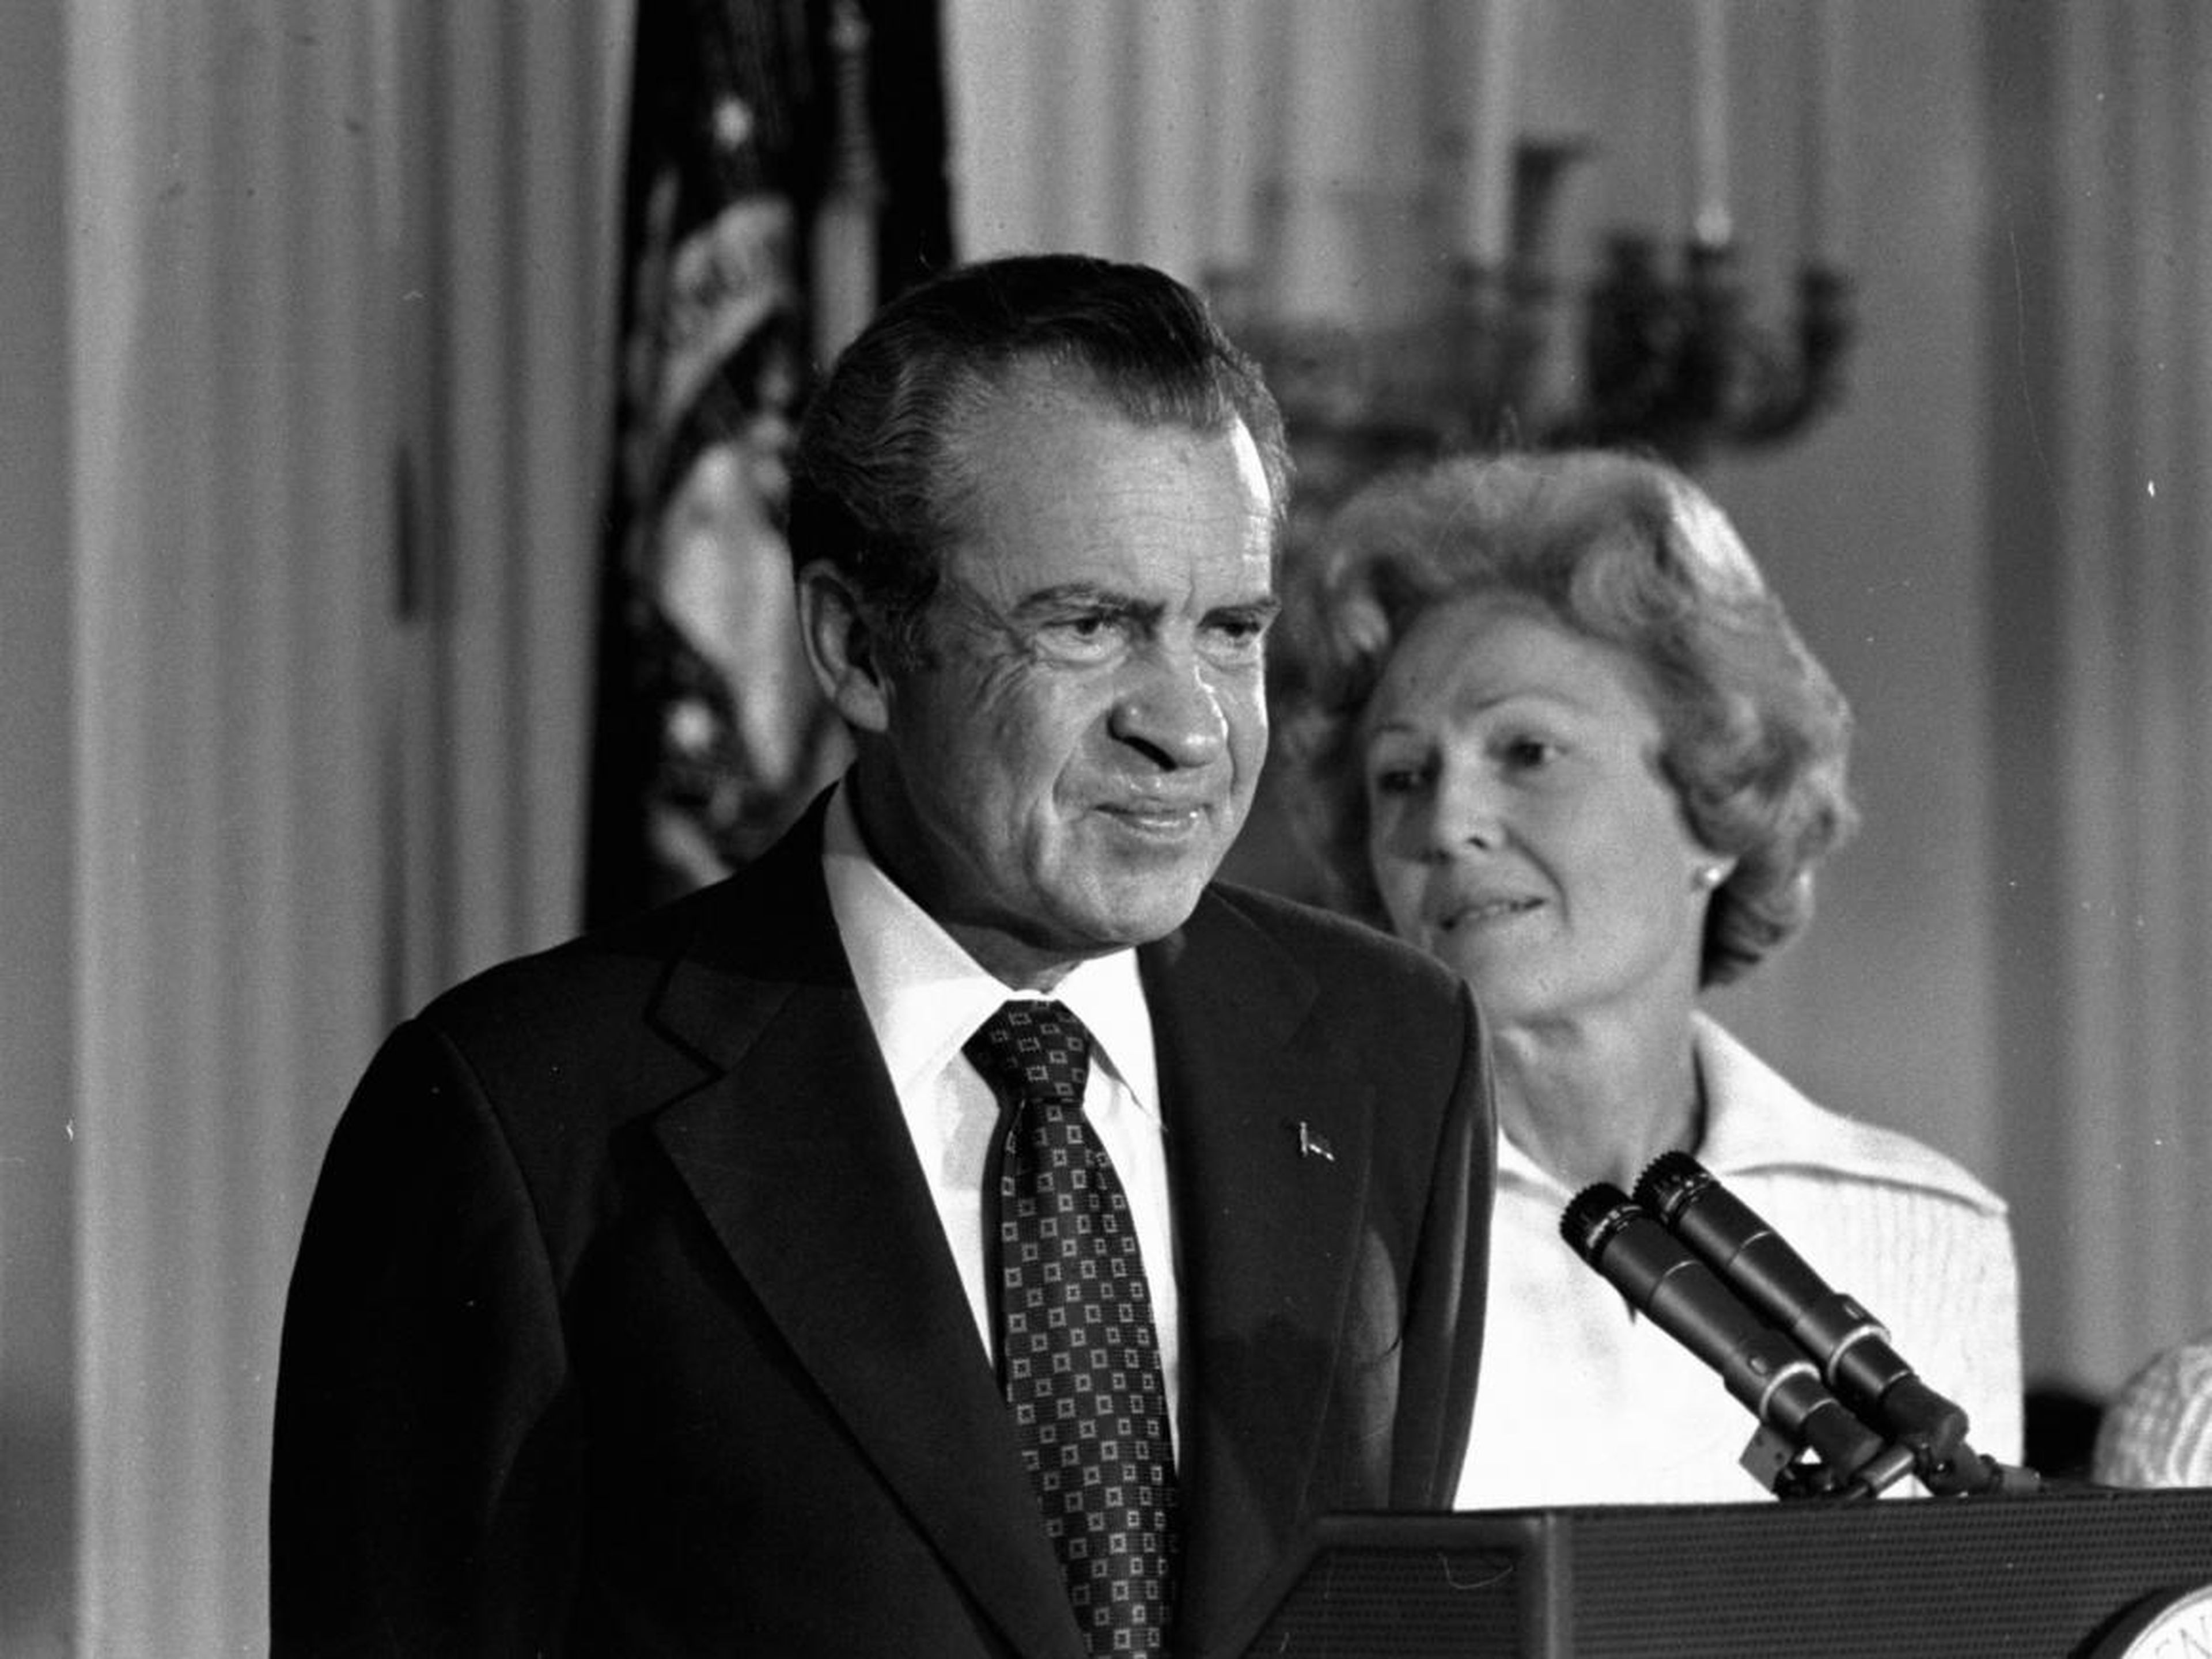 Plagued by the Watergate scandal, a glassy-eyed Nixon delivered a final speech for White House staff and members of his Cabinet in 1974.